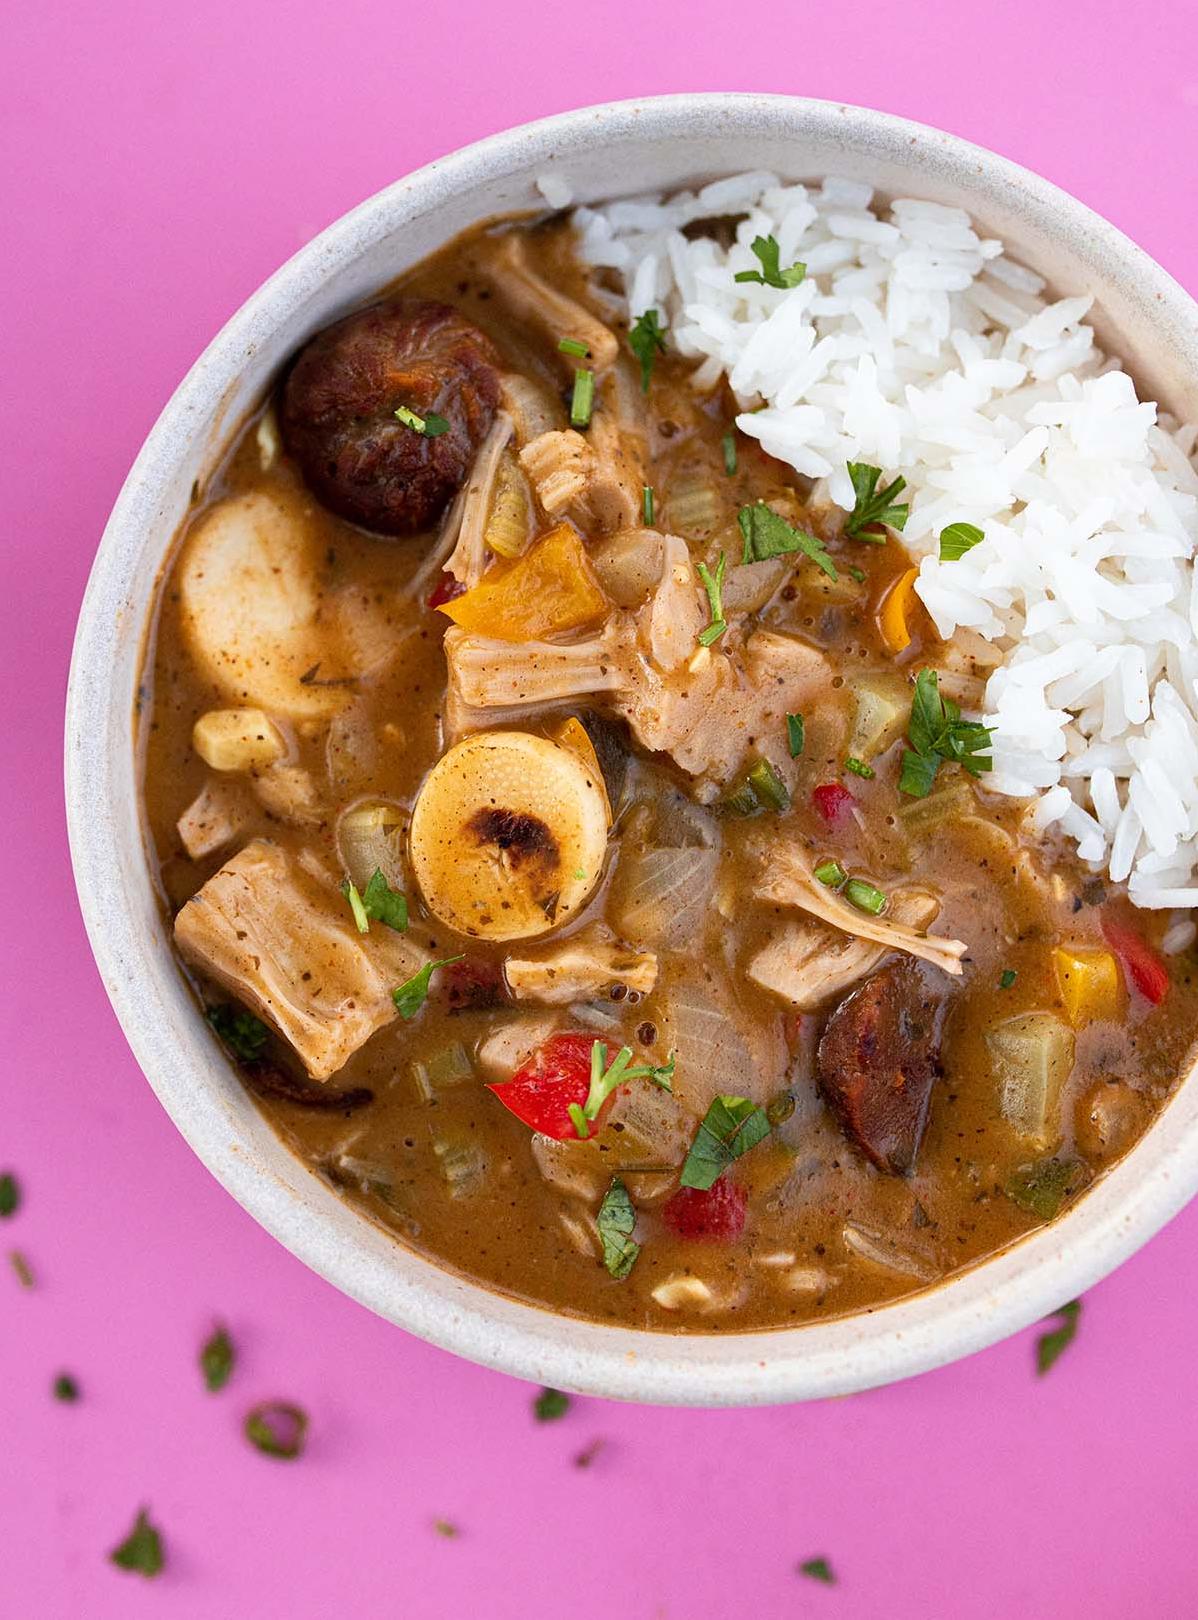  A hearty helping of this veggie gumbo will warm you up from the inside out!